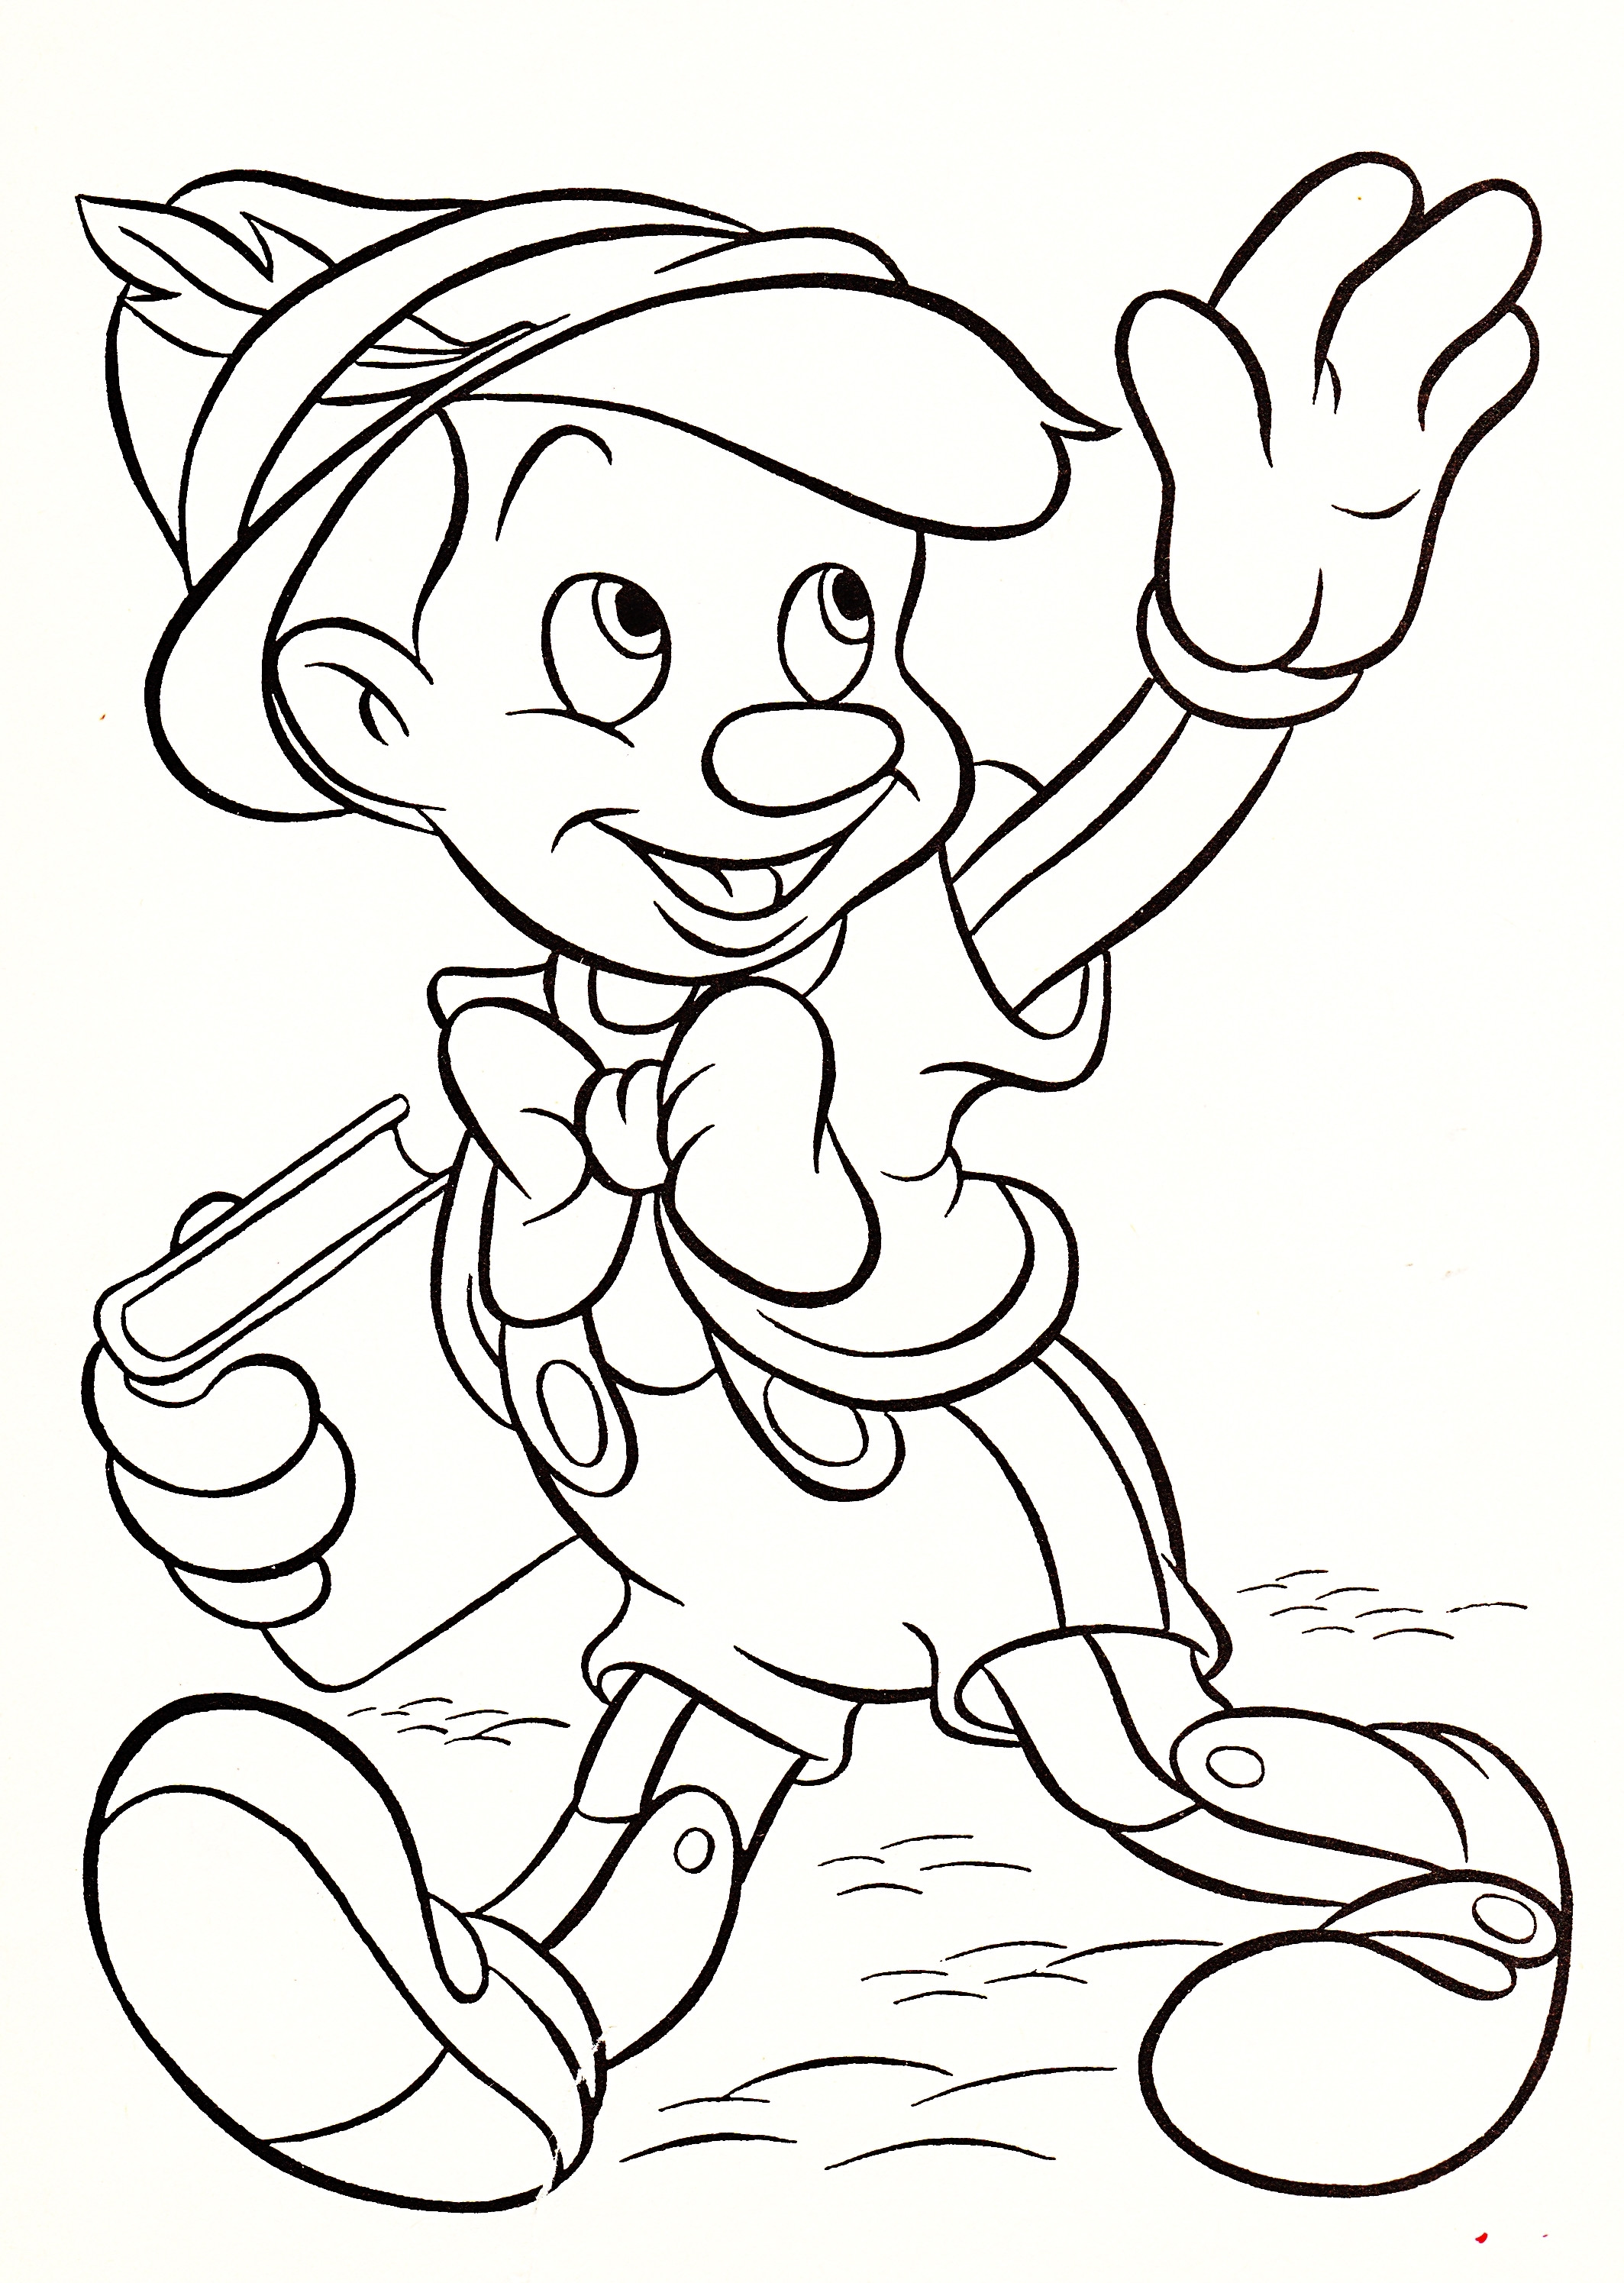 Disney Coloring Books
 Disney Characters Coloring Pages coloringsuite